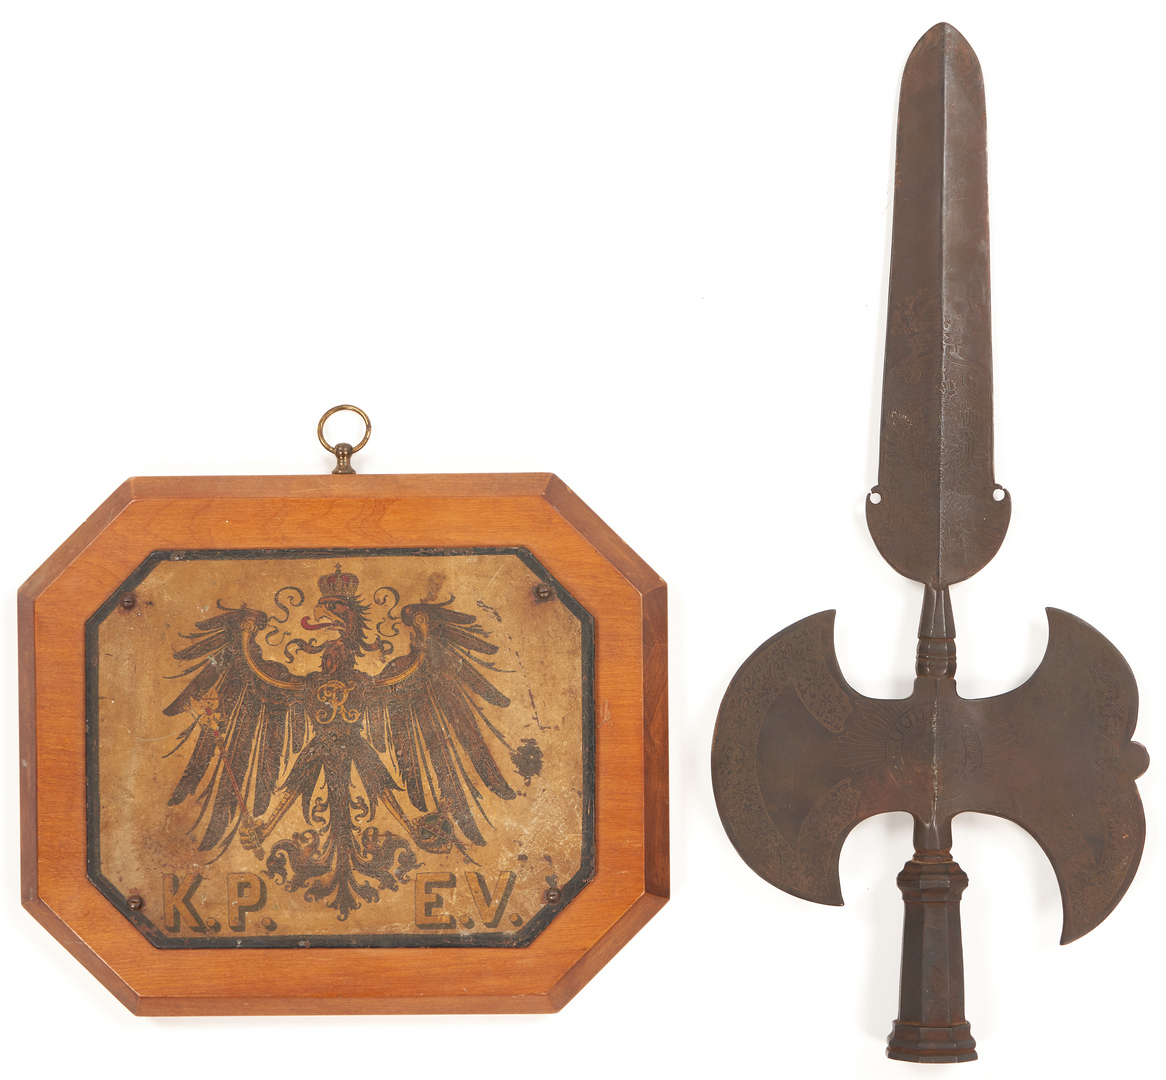 Lot 663: 4 Prussian WWI Items, incl. Halberd or Polearm, KPEV Curtains & Plaque